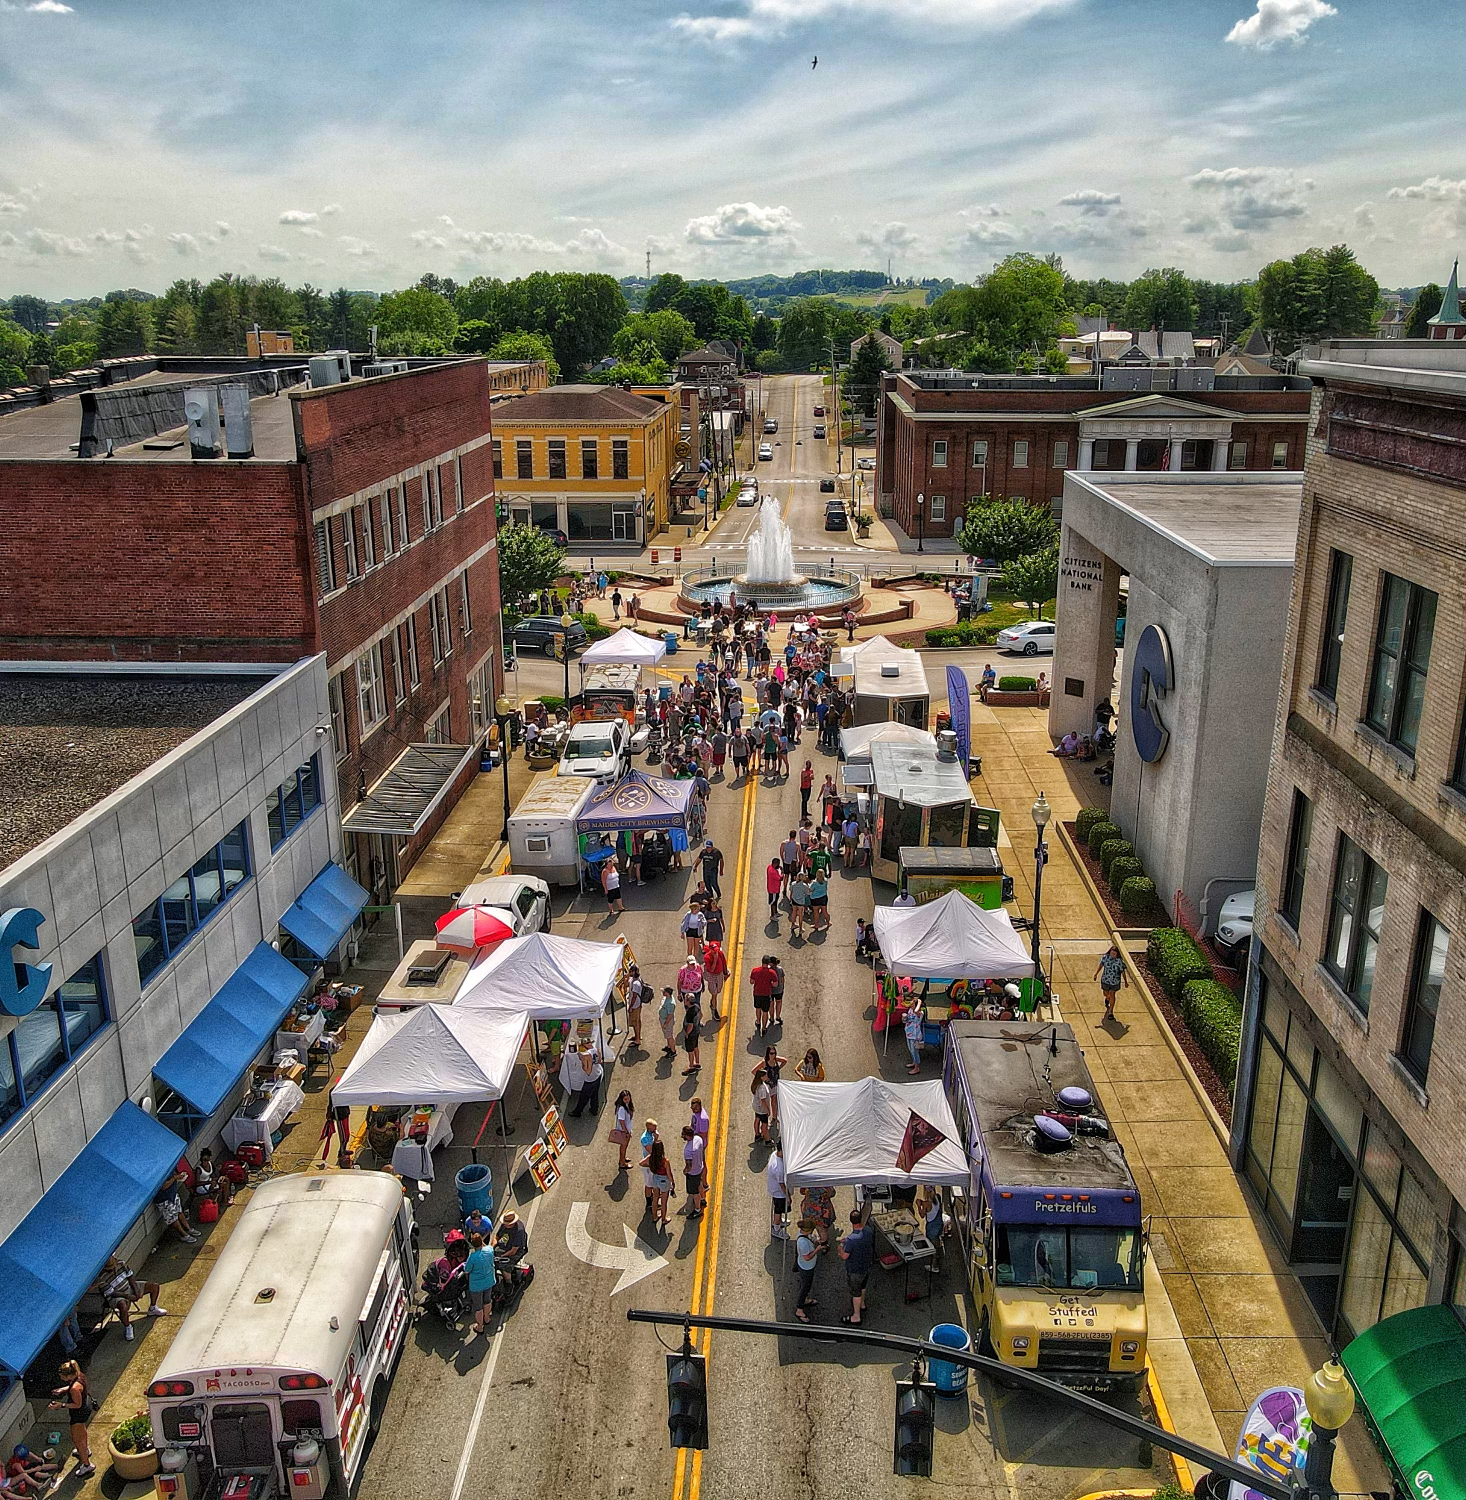 aerial photo of downtown street filled with foodtrucks